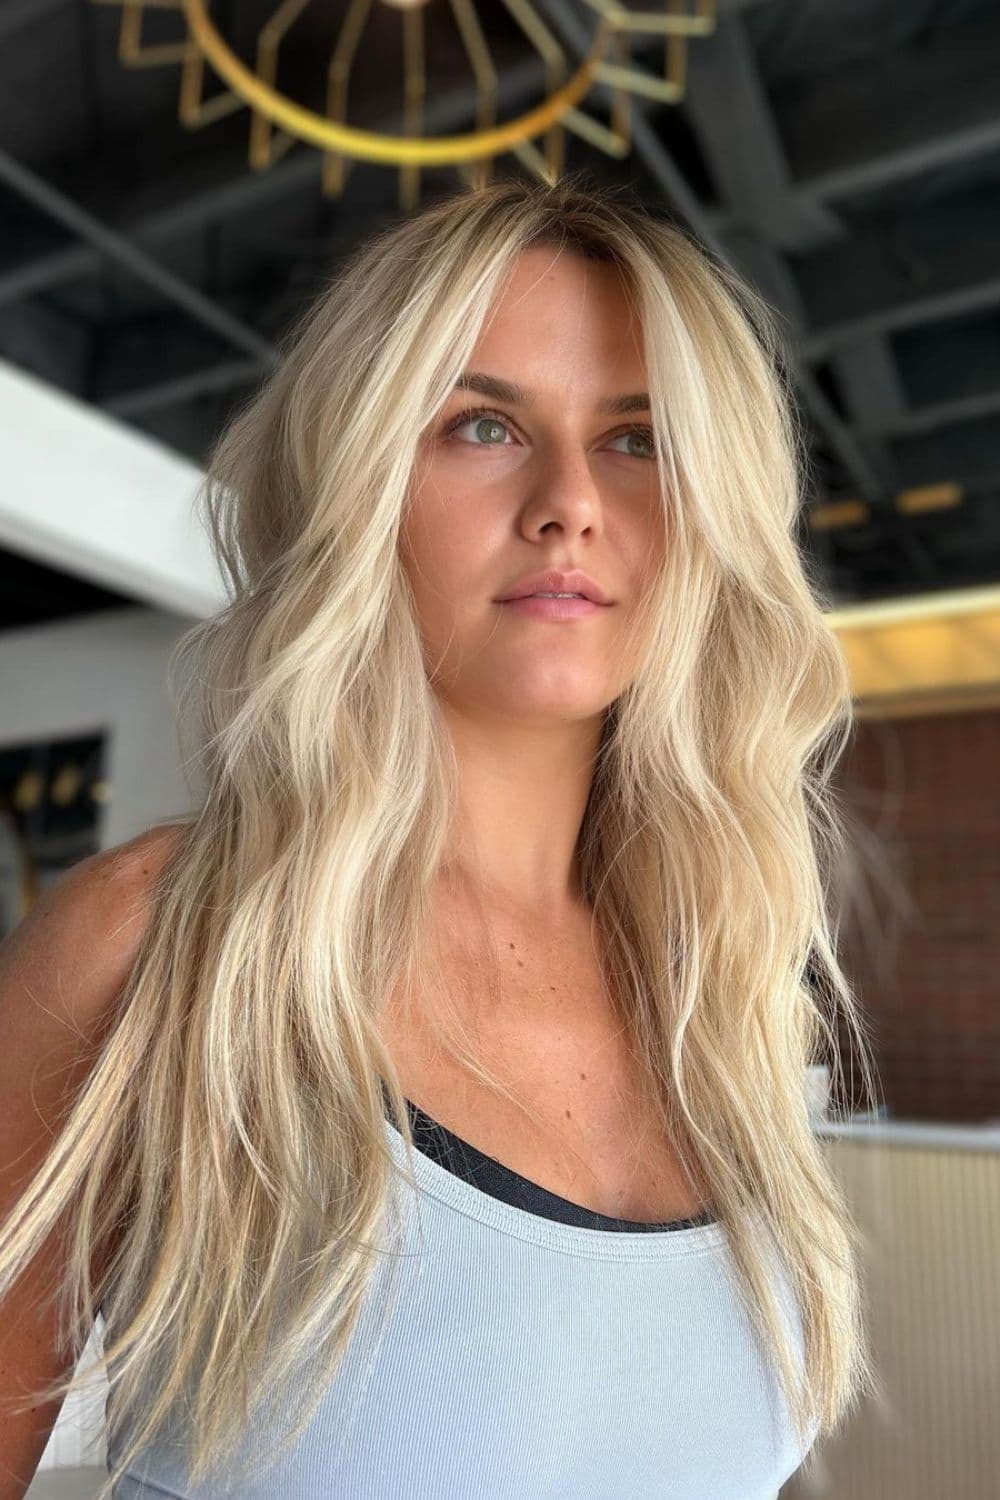 A woman with long blonde beachy middle-parted waves.